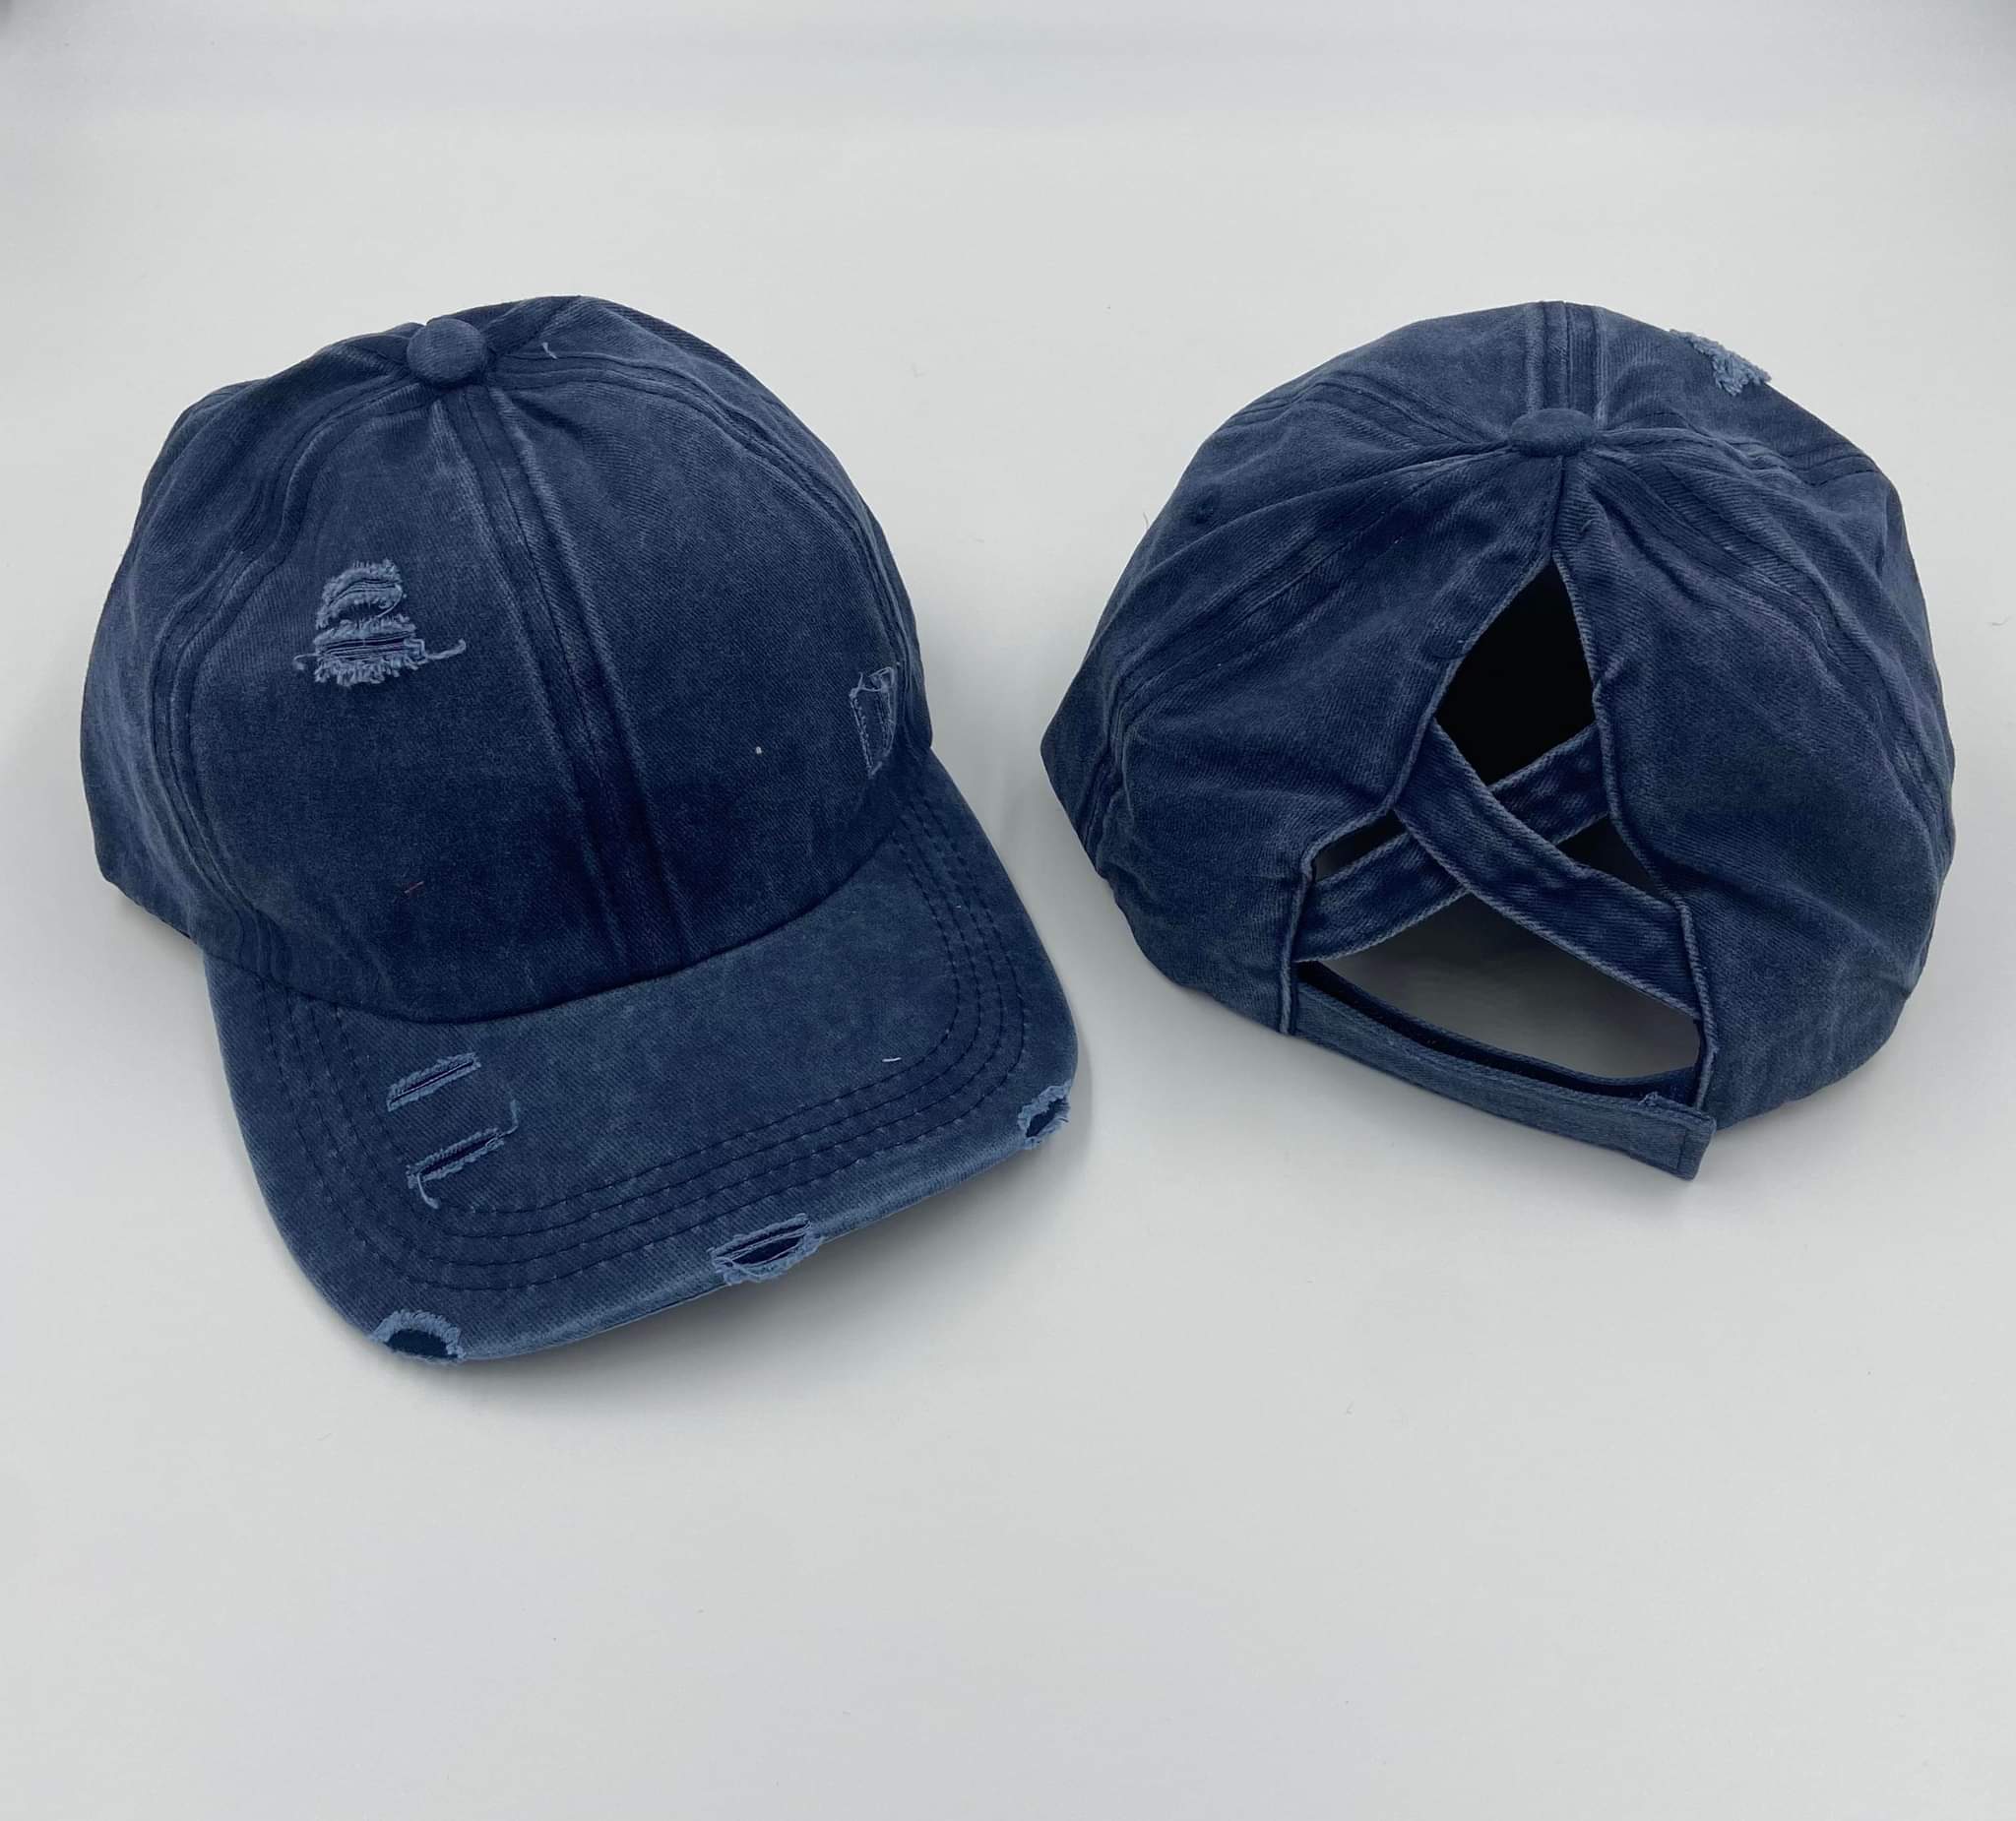 Navy Blue Distressed Cotton Criss Criss Ponytail Hat - Gals and Dogs Boutique Limited